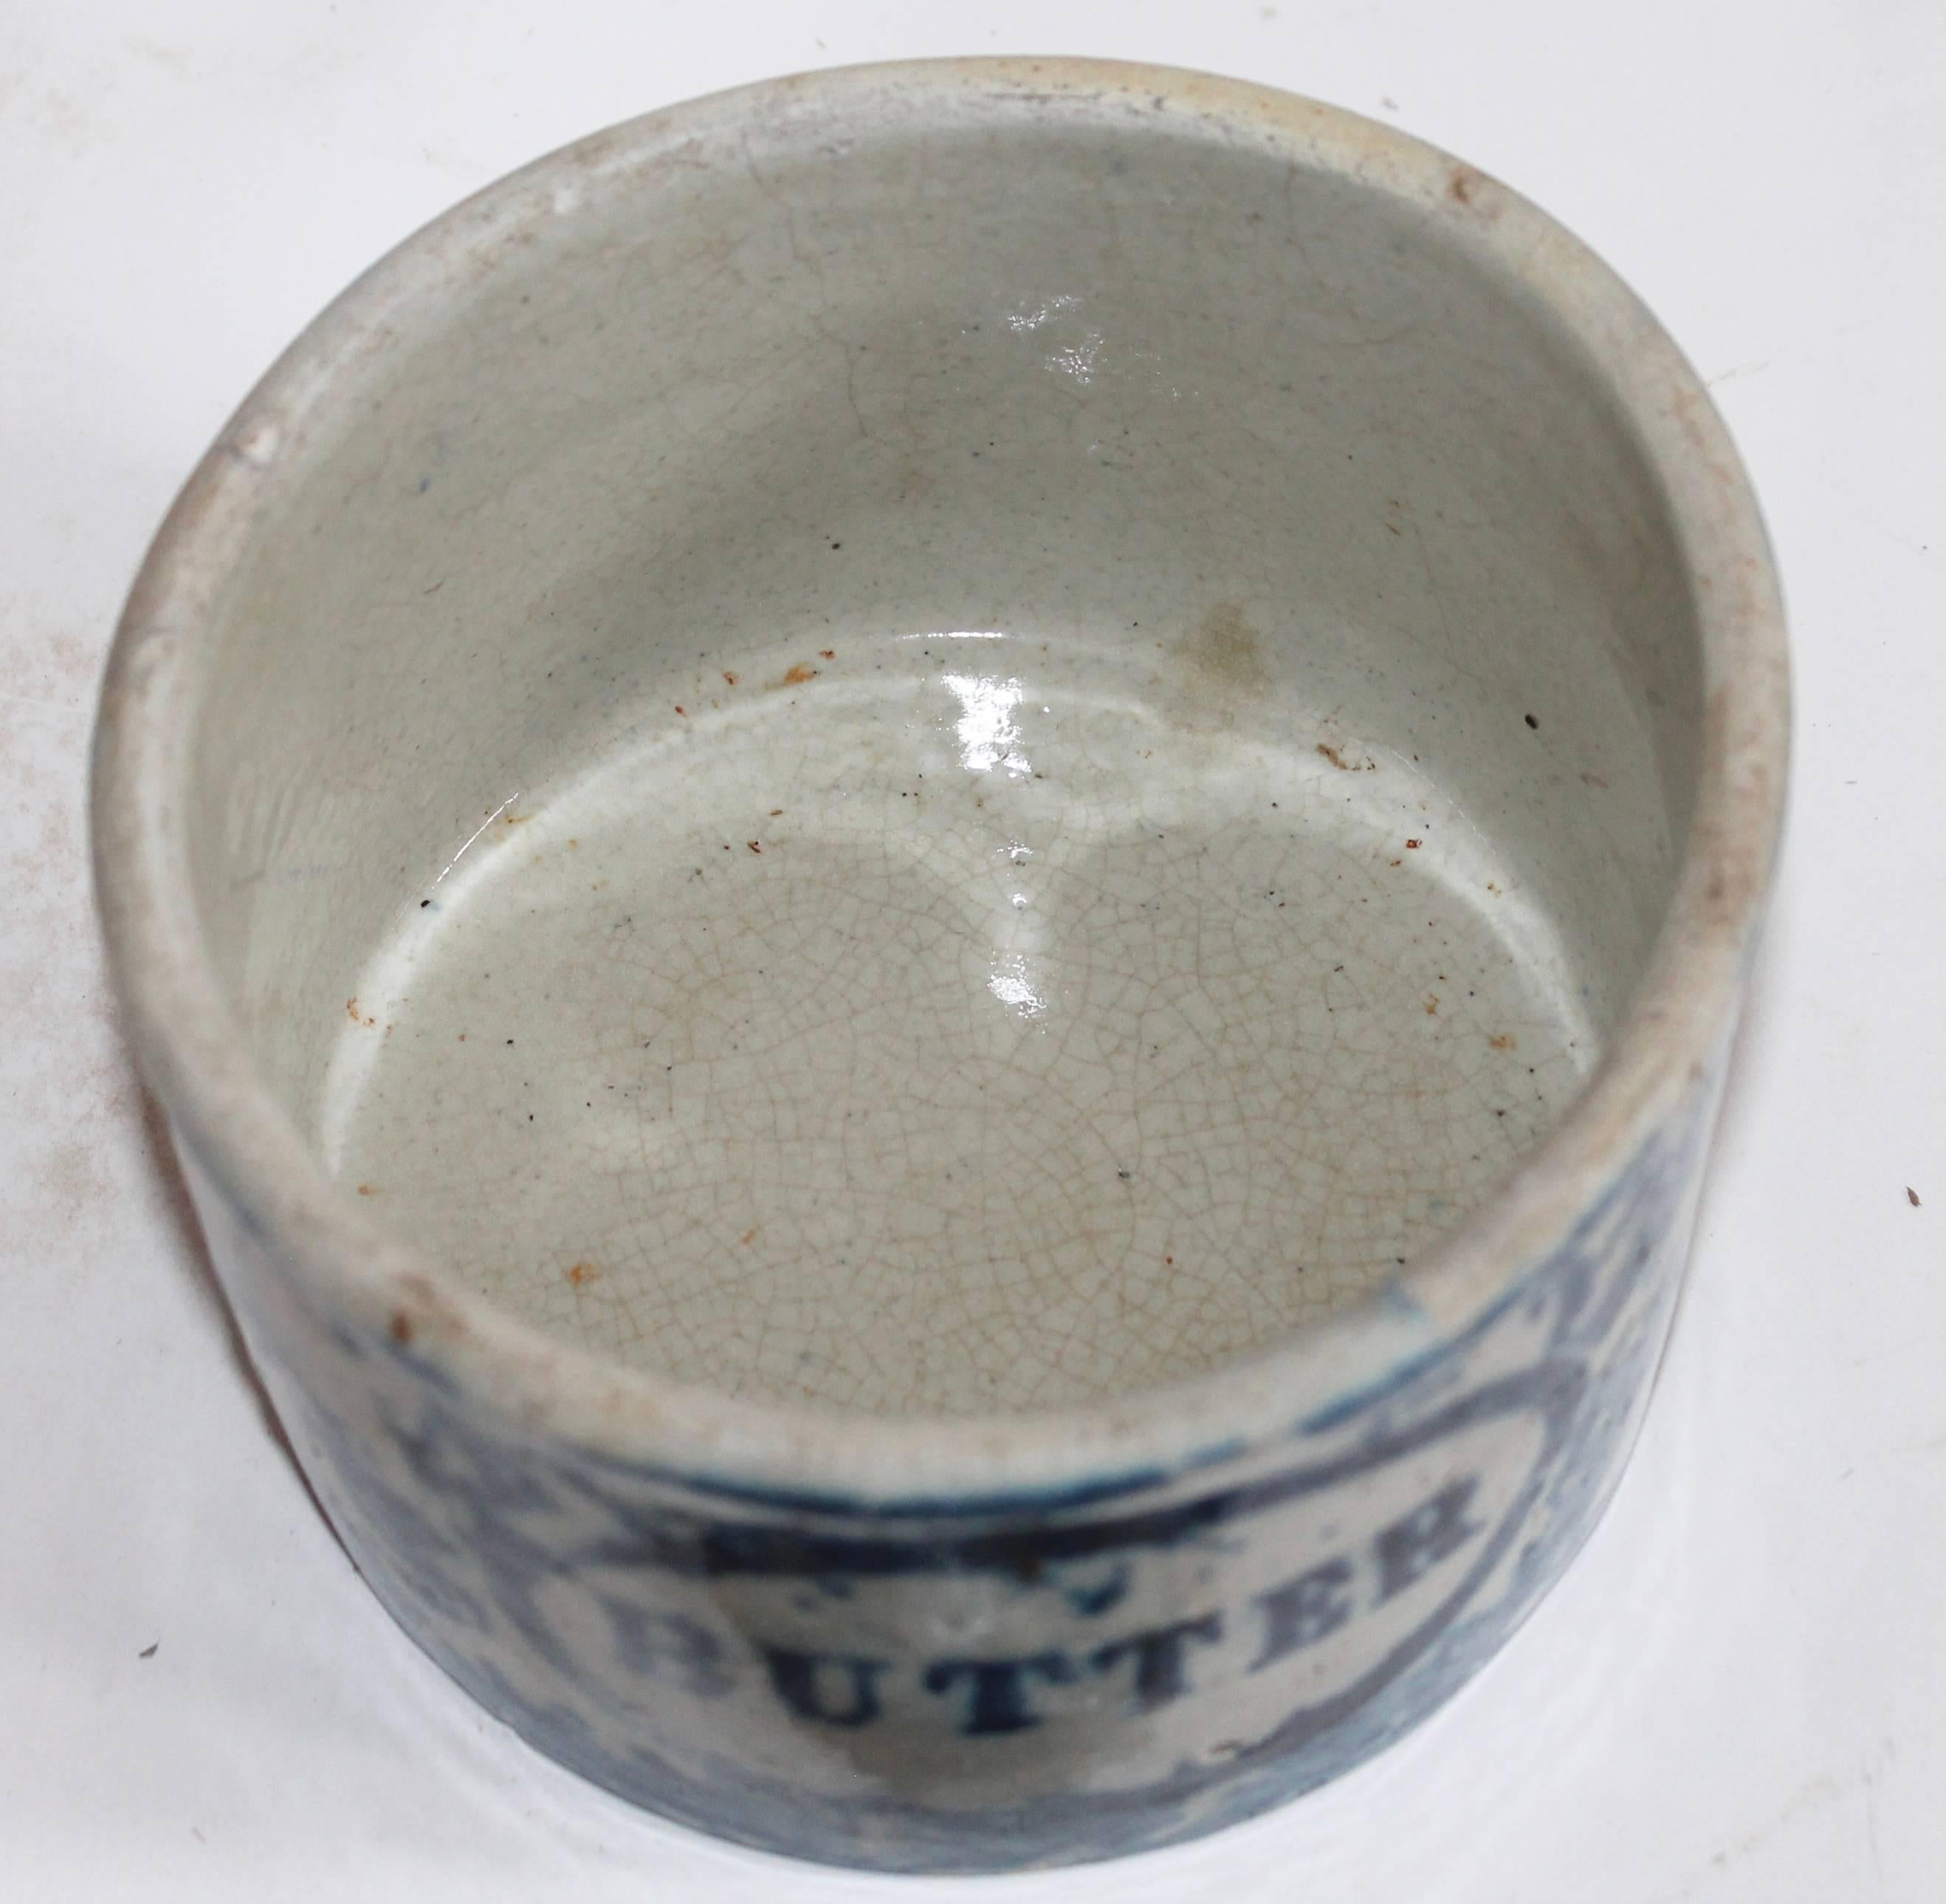 This handmade and painted butter crock was found in Pennsylvania and is in good condition with the exception of the old repairs to the lid. The base has no cracks or chips.